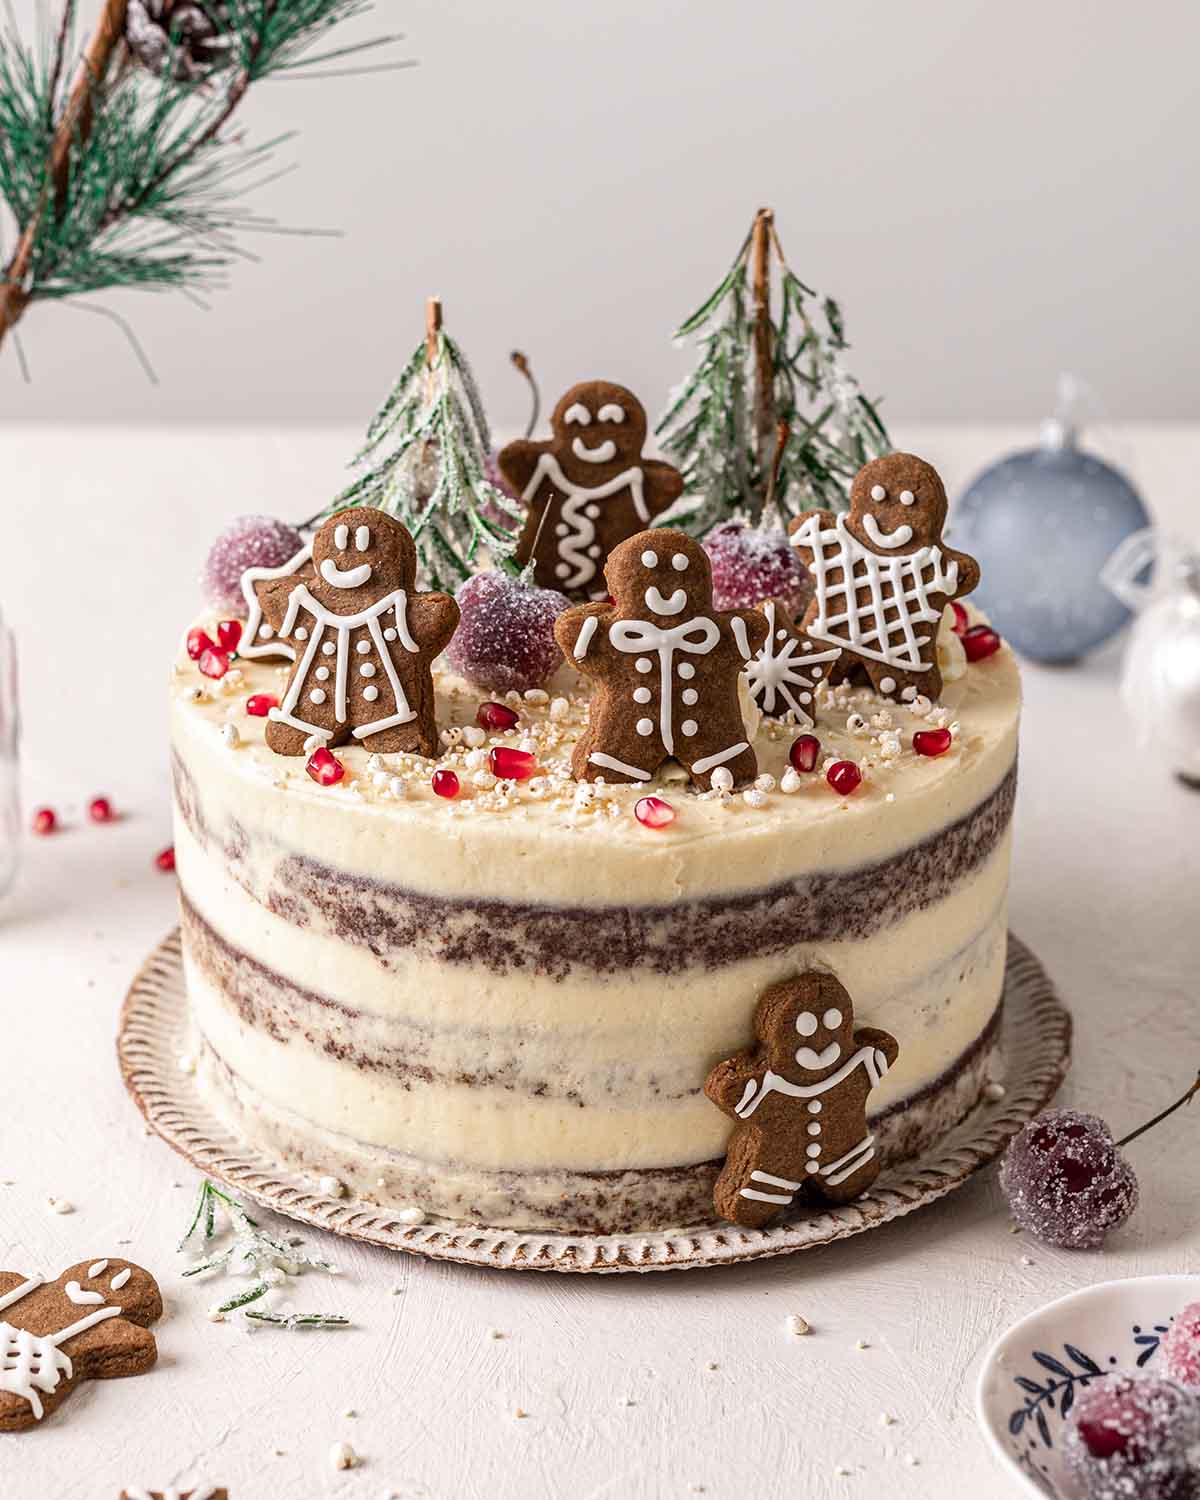 Fully decorated gingerbread cake with thin layer of frosting, topped with cookies, sugared cherries and rosemary.